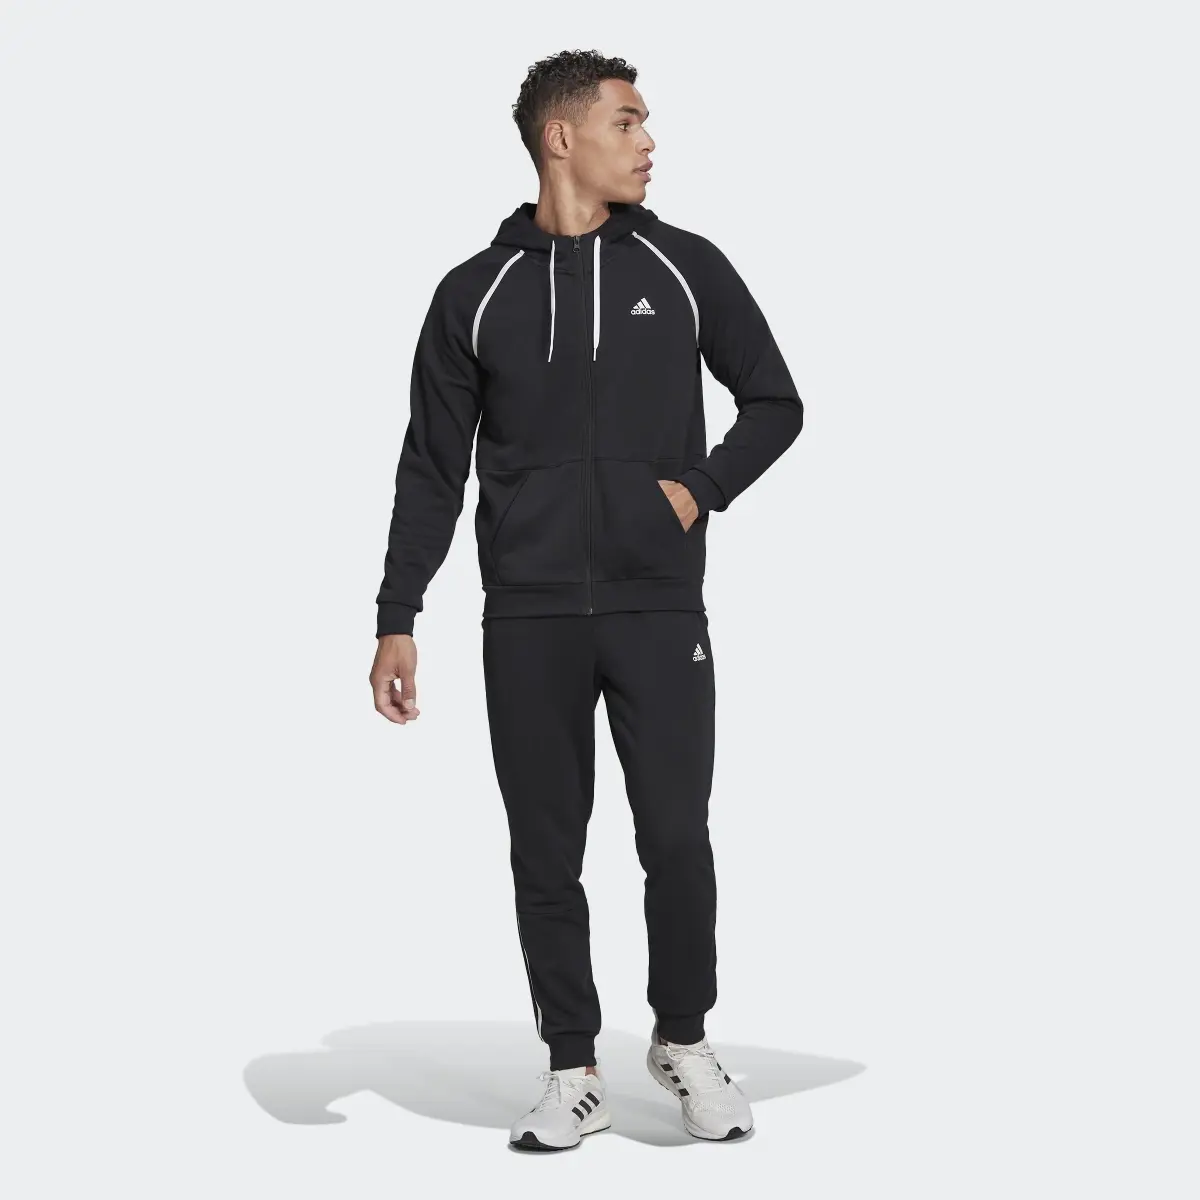 Adidas Cotton Piping Tracksuit. 2